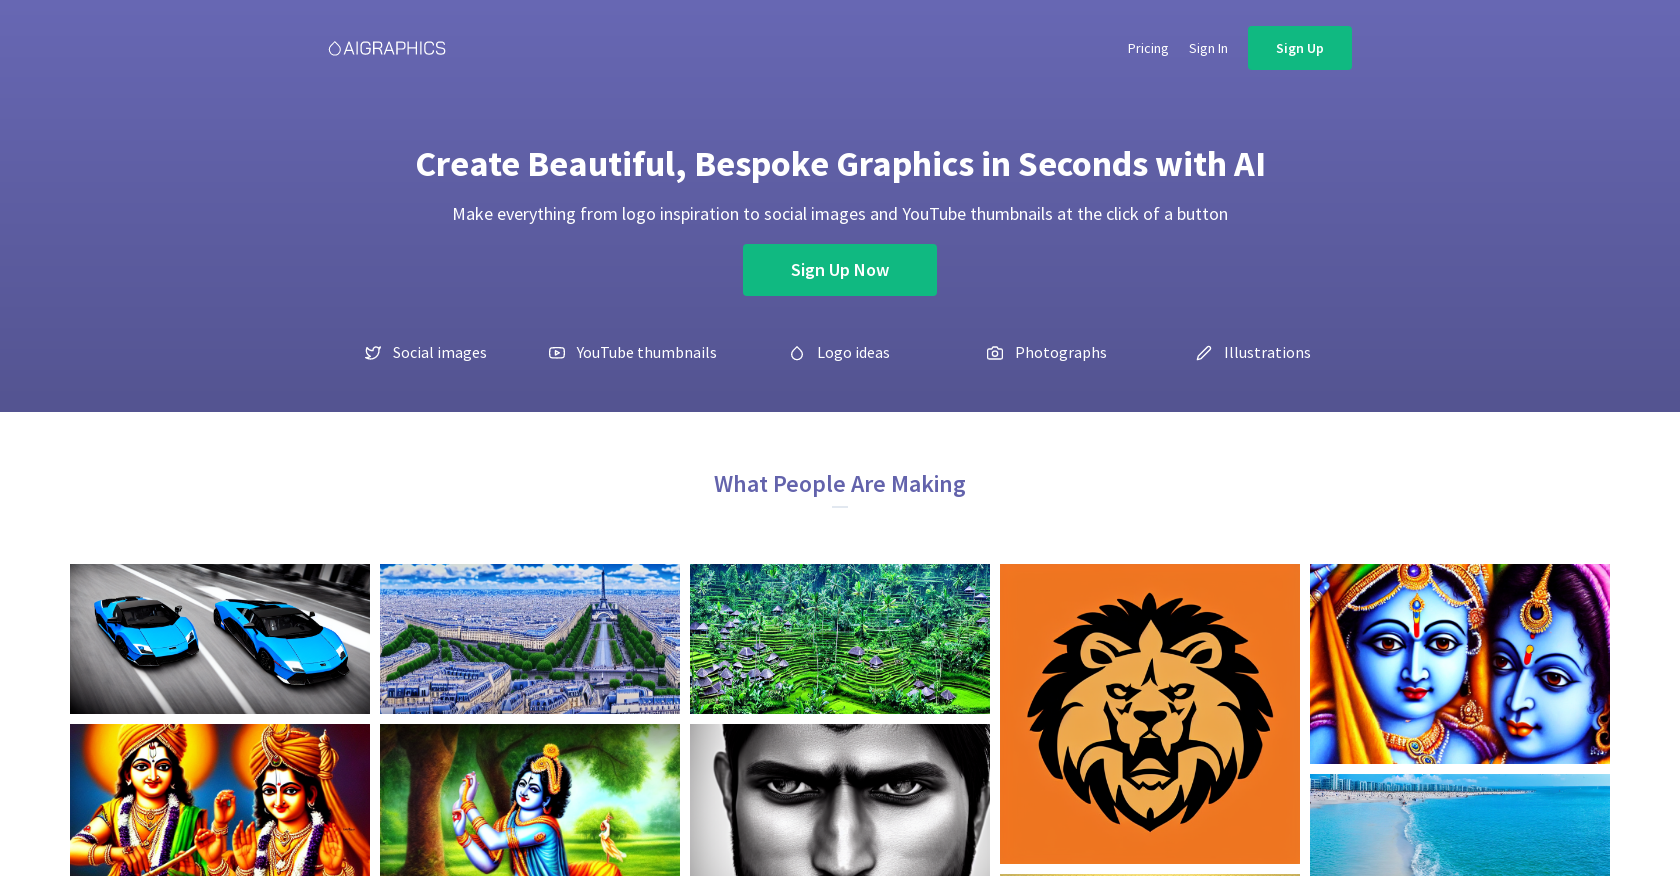 AIGraphicsAI powered tools create stunning visuals quickly for users seeking visual